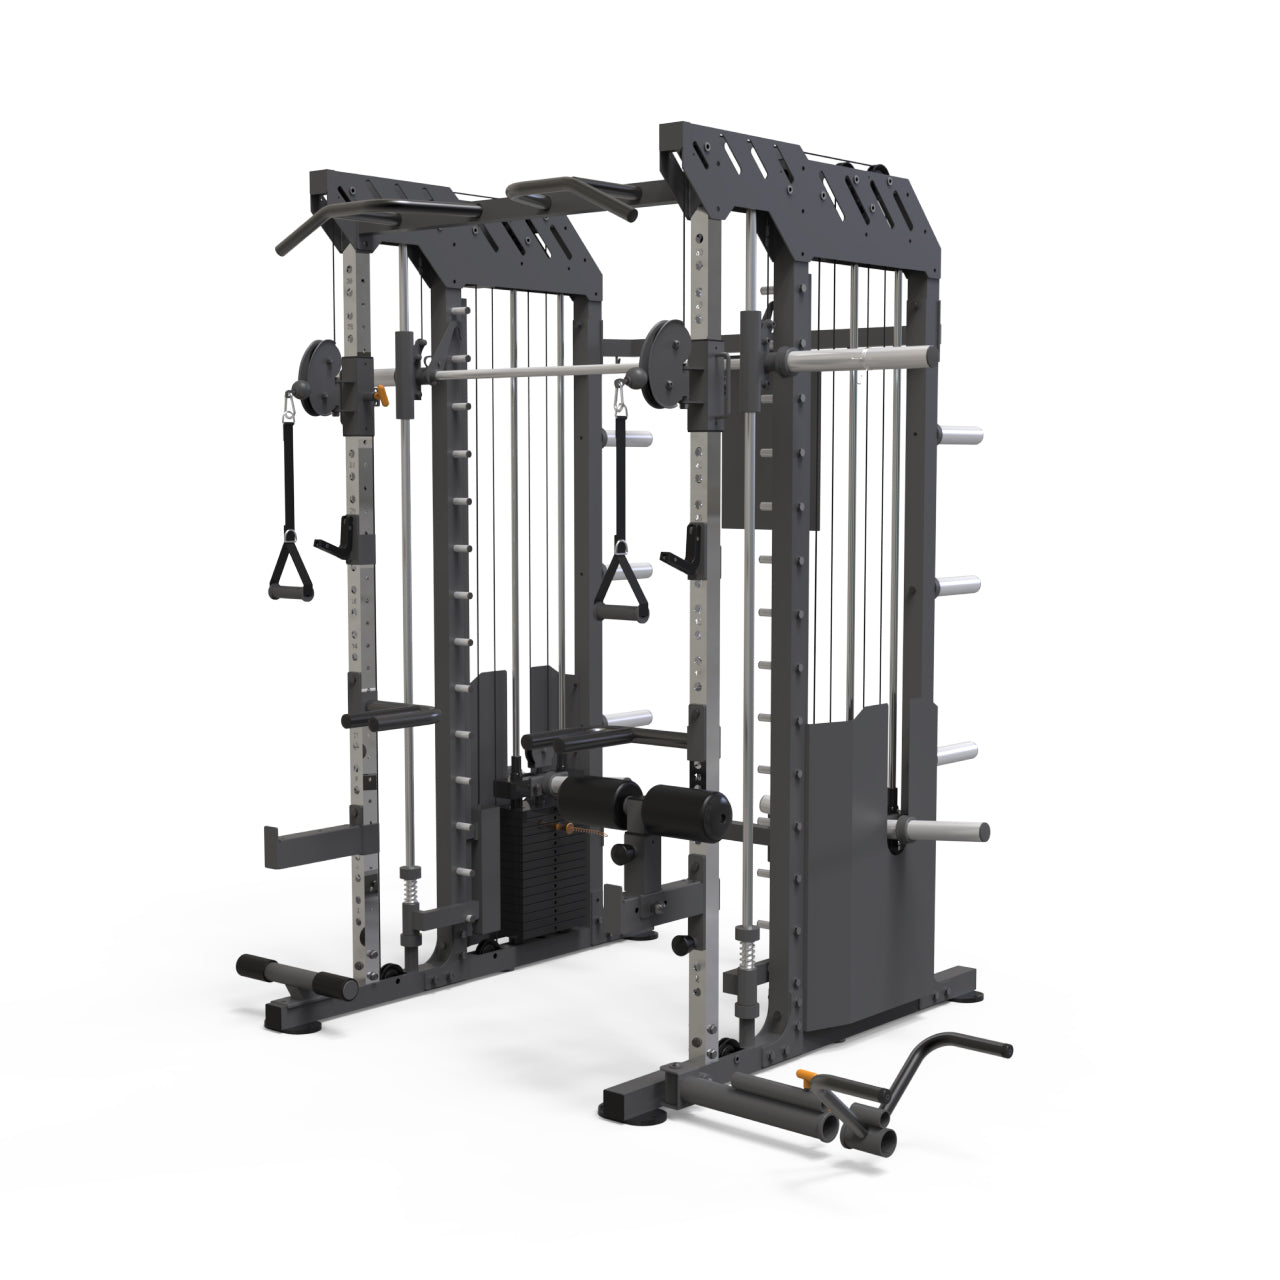 Primal Personal Series Multi Rack System with 2 x 90kg Weight Stacks